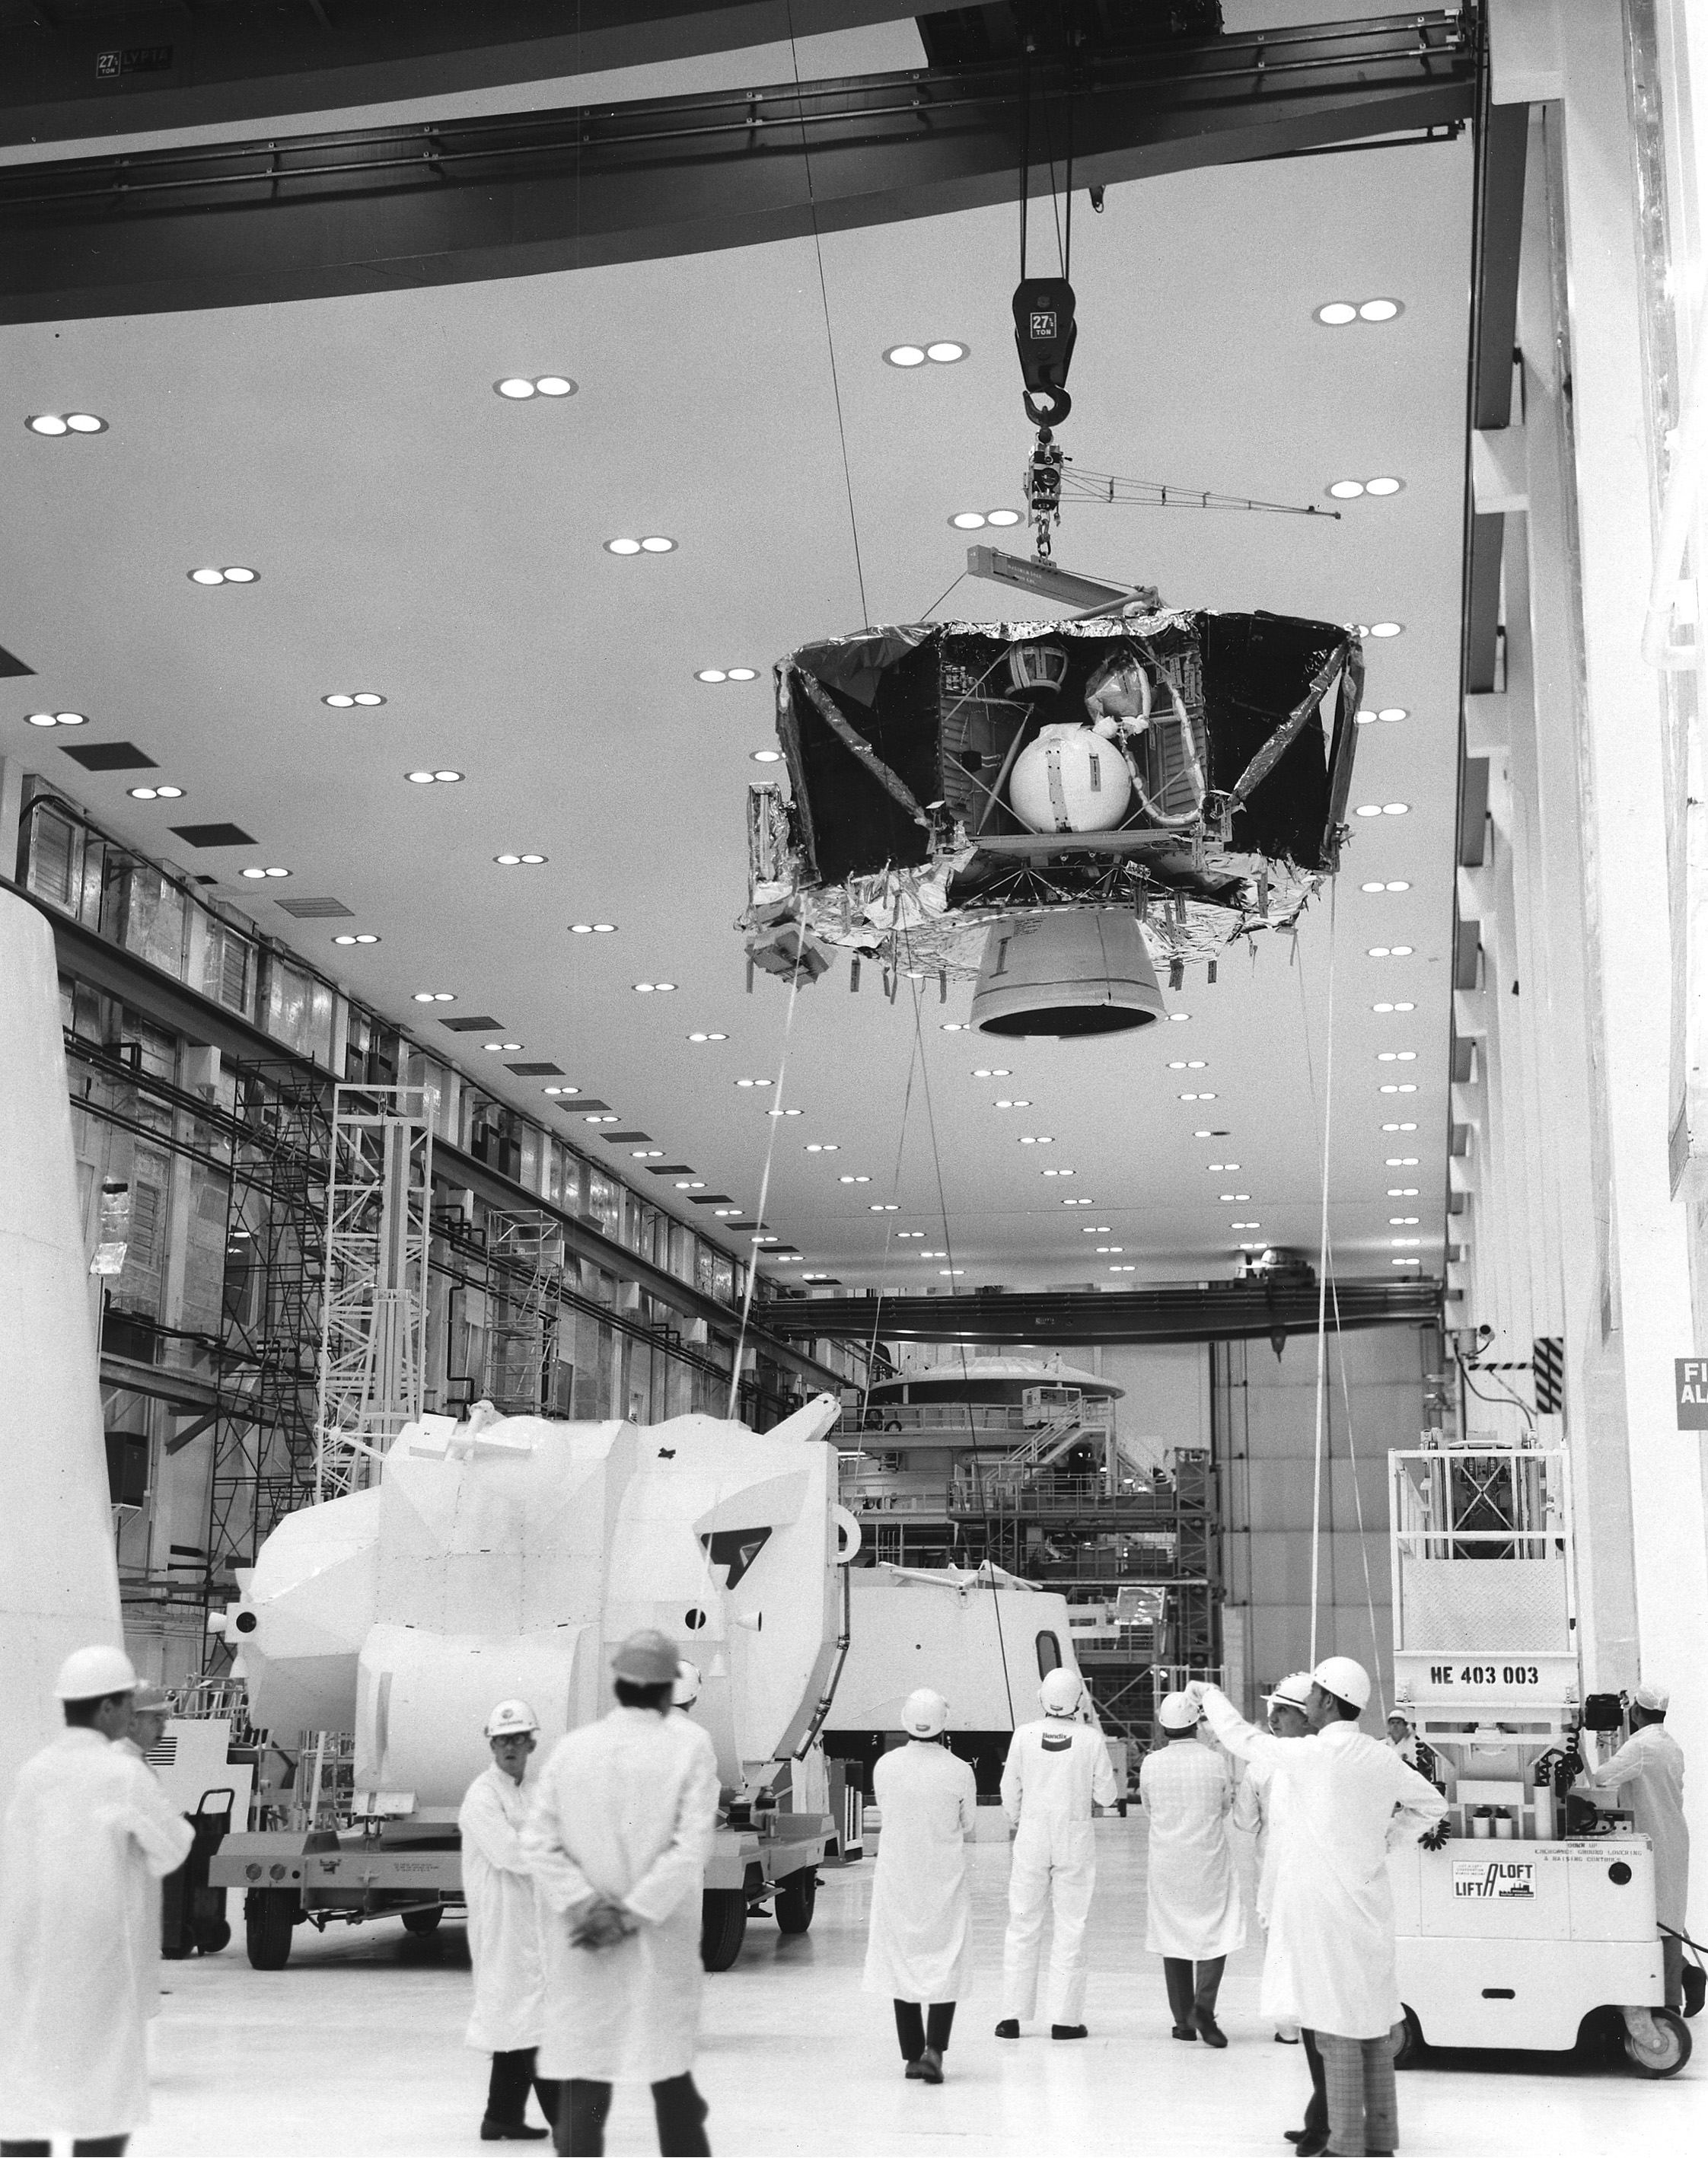 Workers in the Manned Spacecraft Operations Building (MSOB) at NASA’s Kennedy Space Center in Florida uncrate the Apollo 10 Lunar Module (LM) descent stage shortly after its arrival